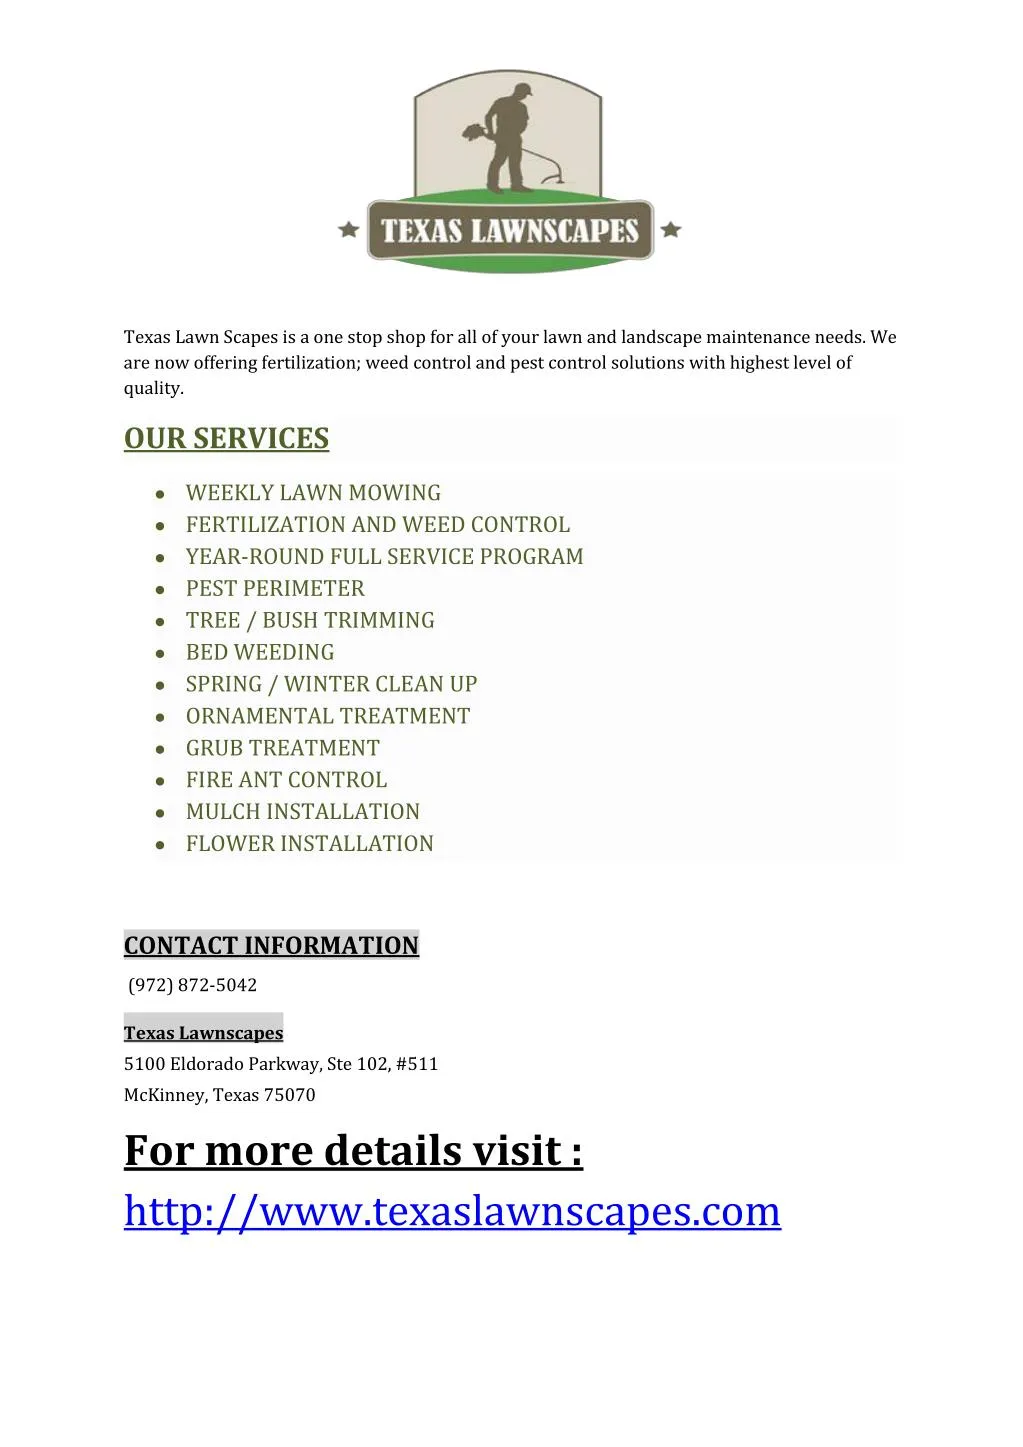 texas lawn scapes is a one stop shop